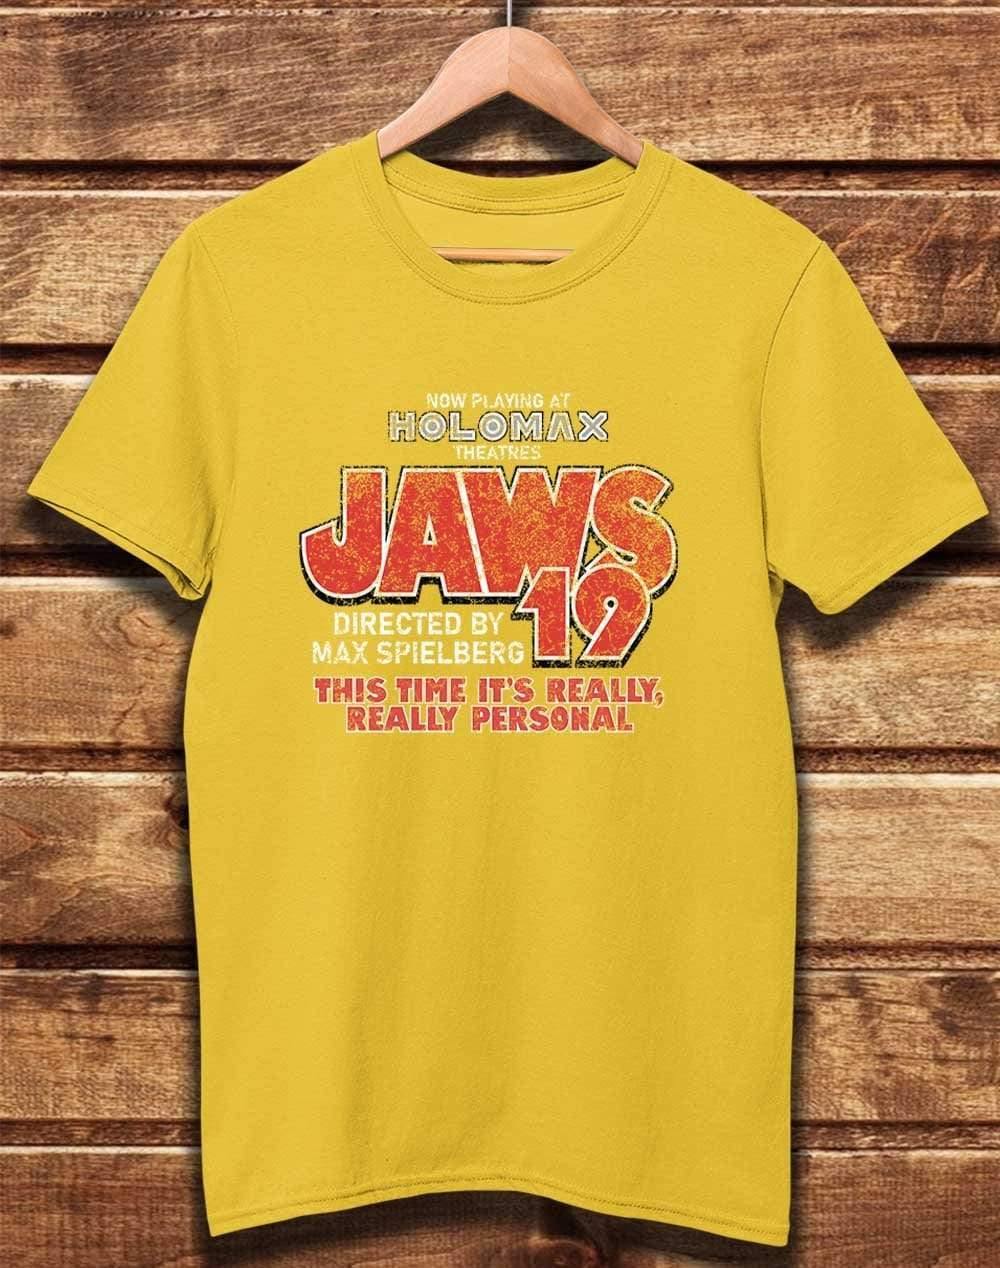 DELUXE Jaws 19 Organic Cotton T-Shirt S / Yellow  - Off World Tees